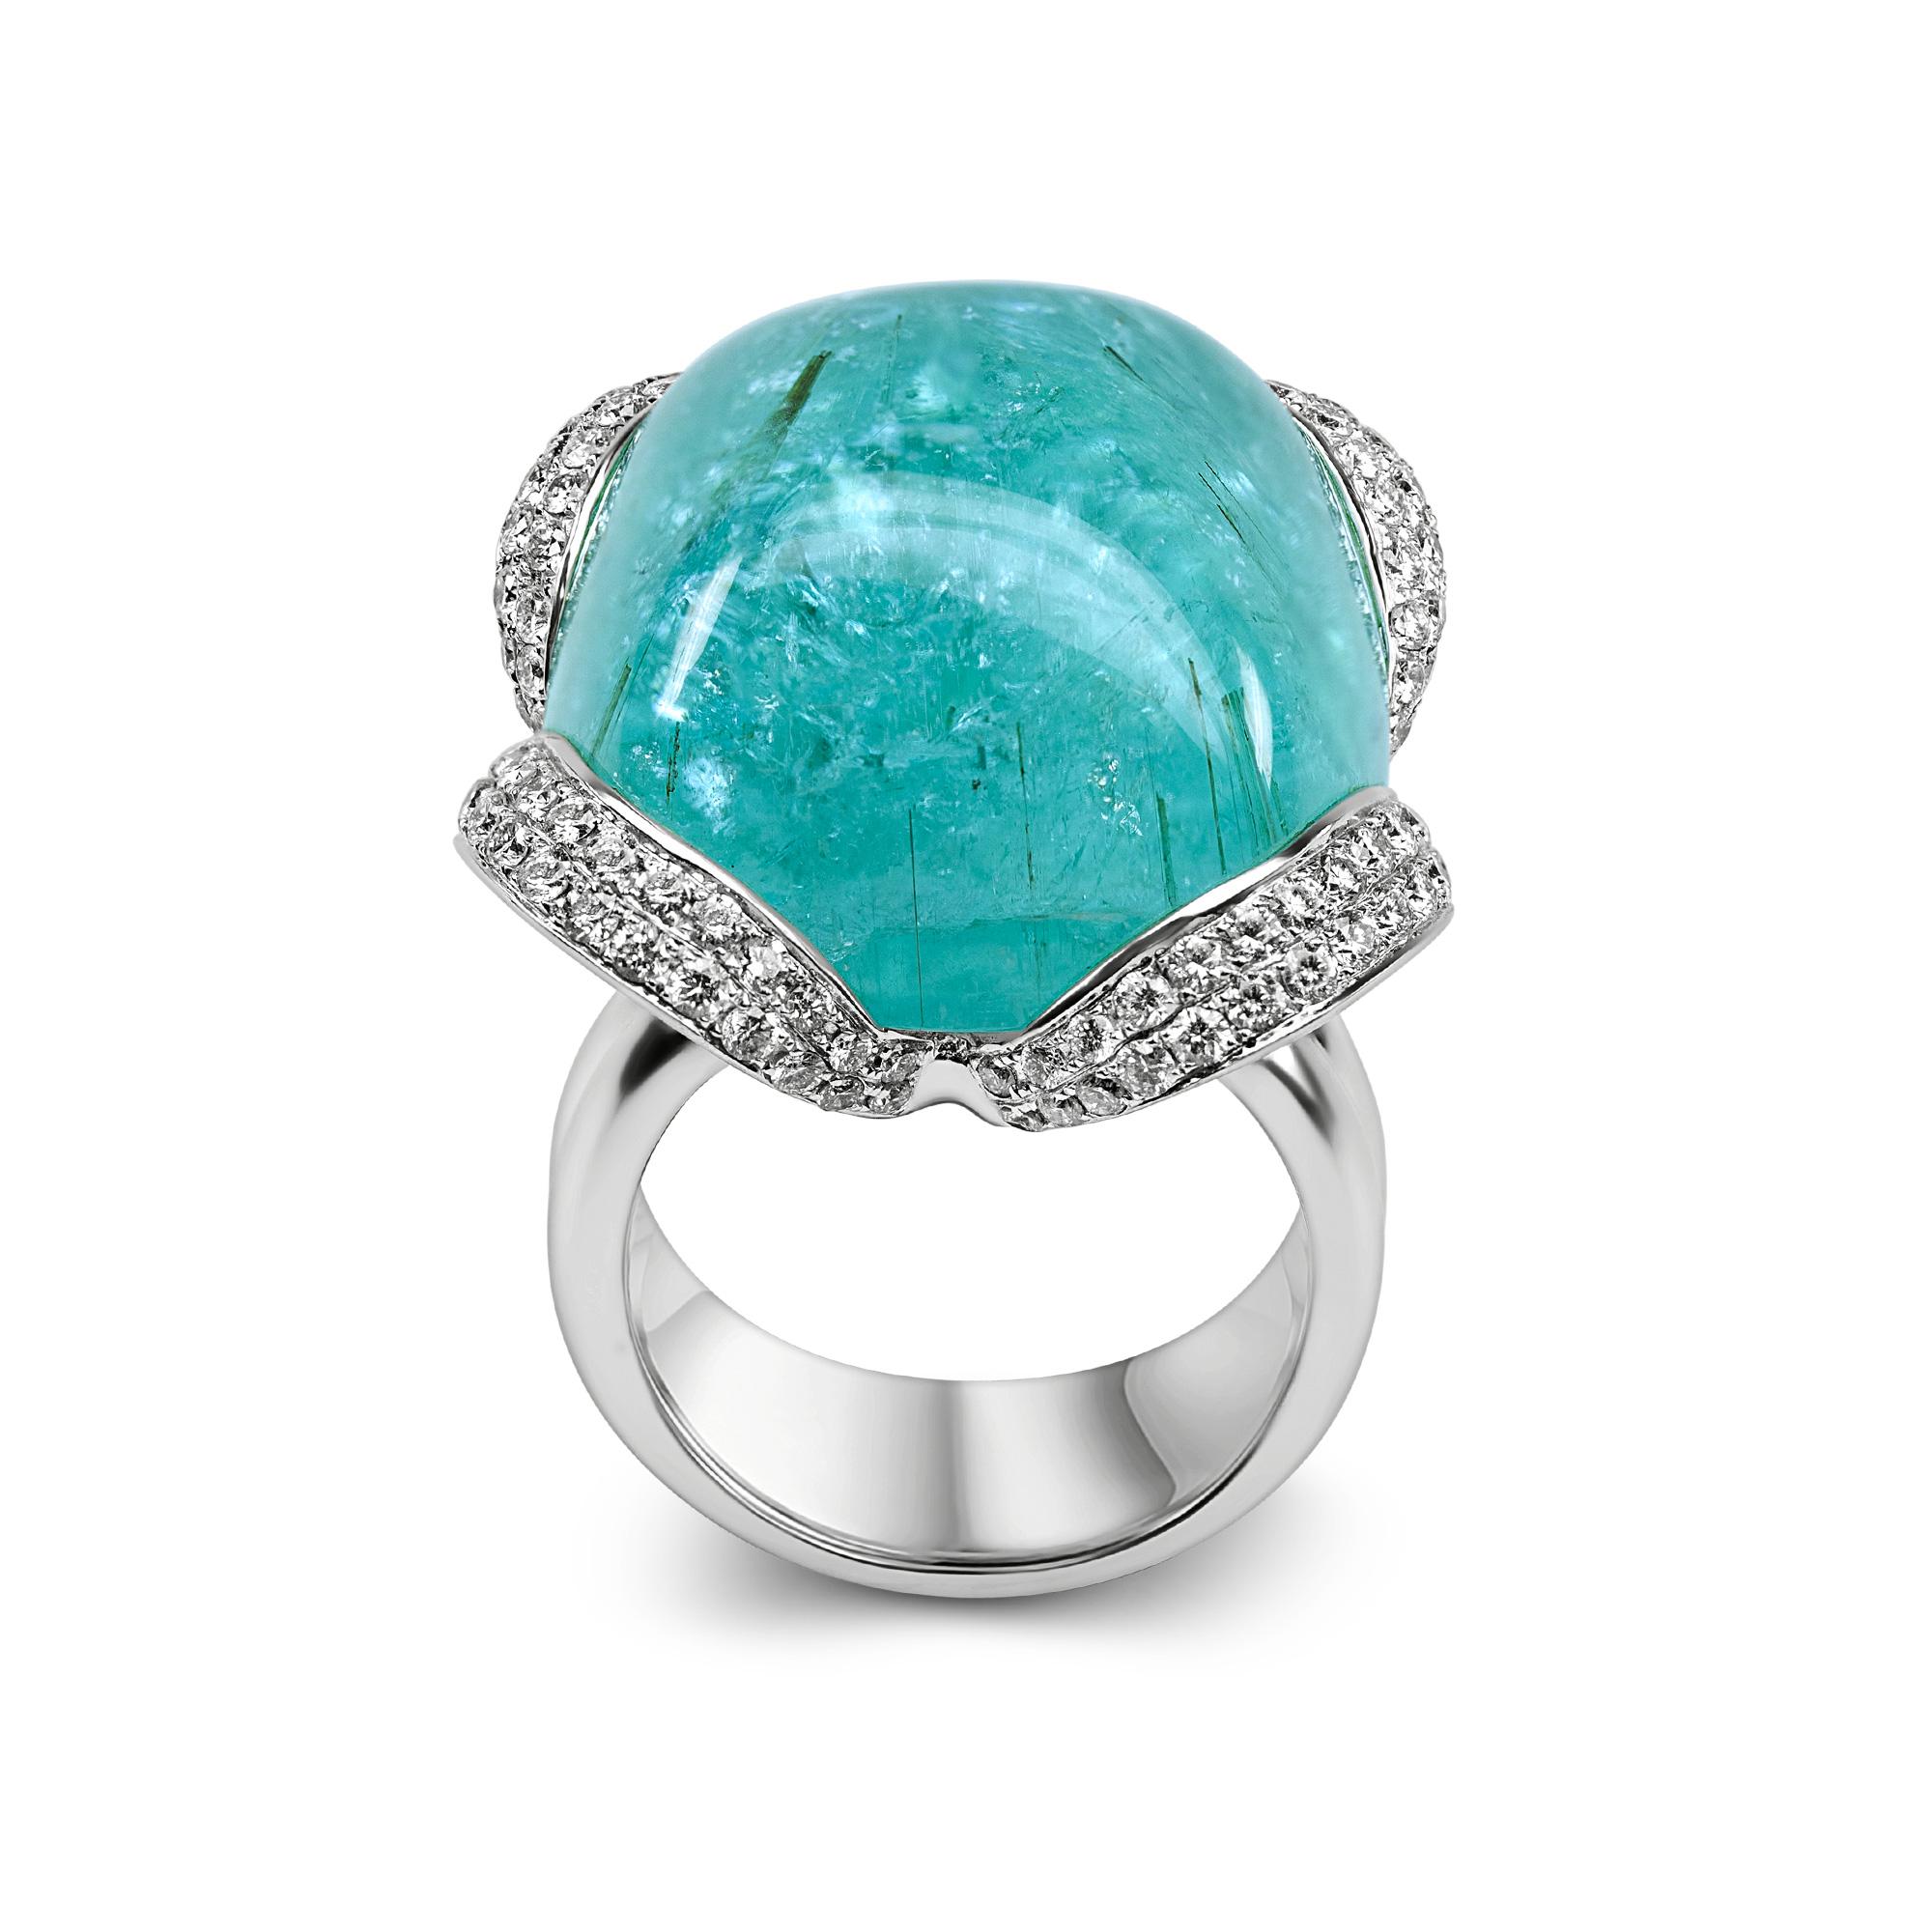 Certified 56.21 Carat Paraiba Tourmaline Cabochon 18K Gold Cocktail Ring

A contemporary ring made of 18k white gold and set with:
- A cushion shaped Paraiba cabochon weighing a total of 56.21 ct
- 120 white diamants weighing a total of 1.24 ct

The